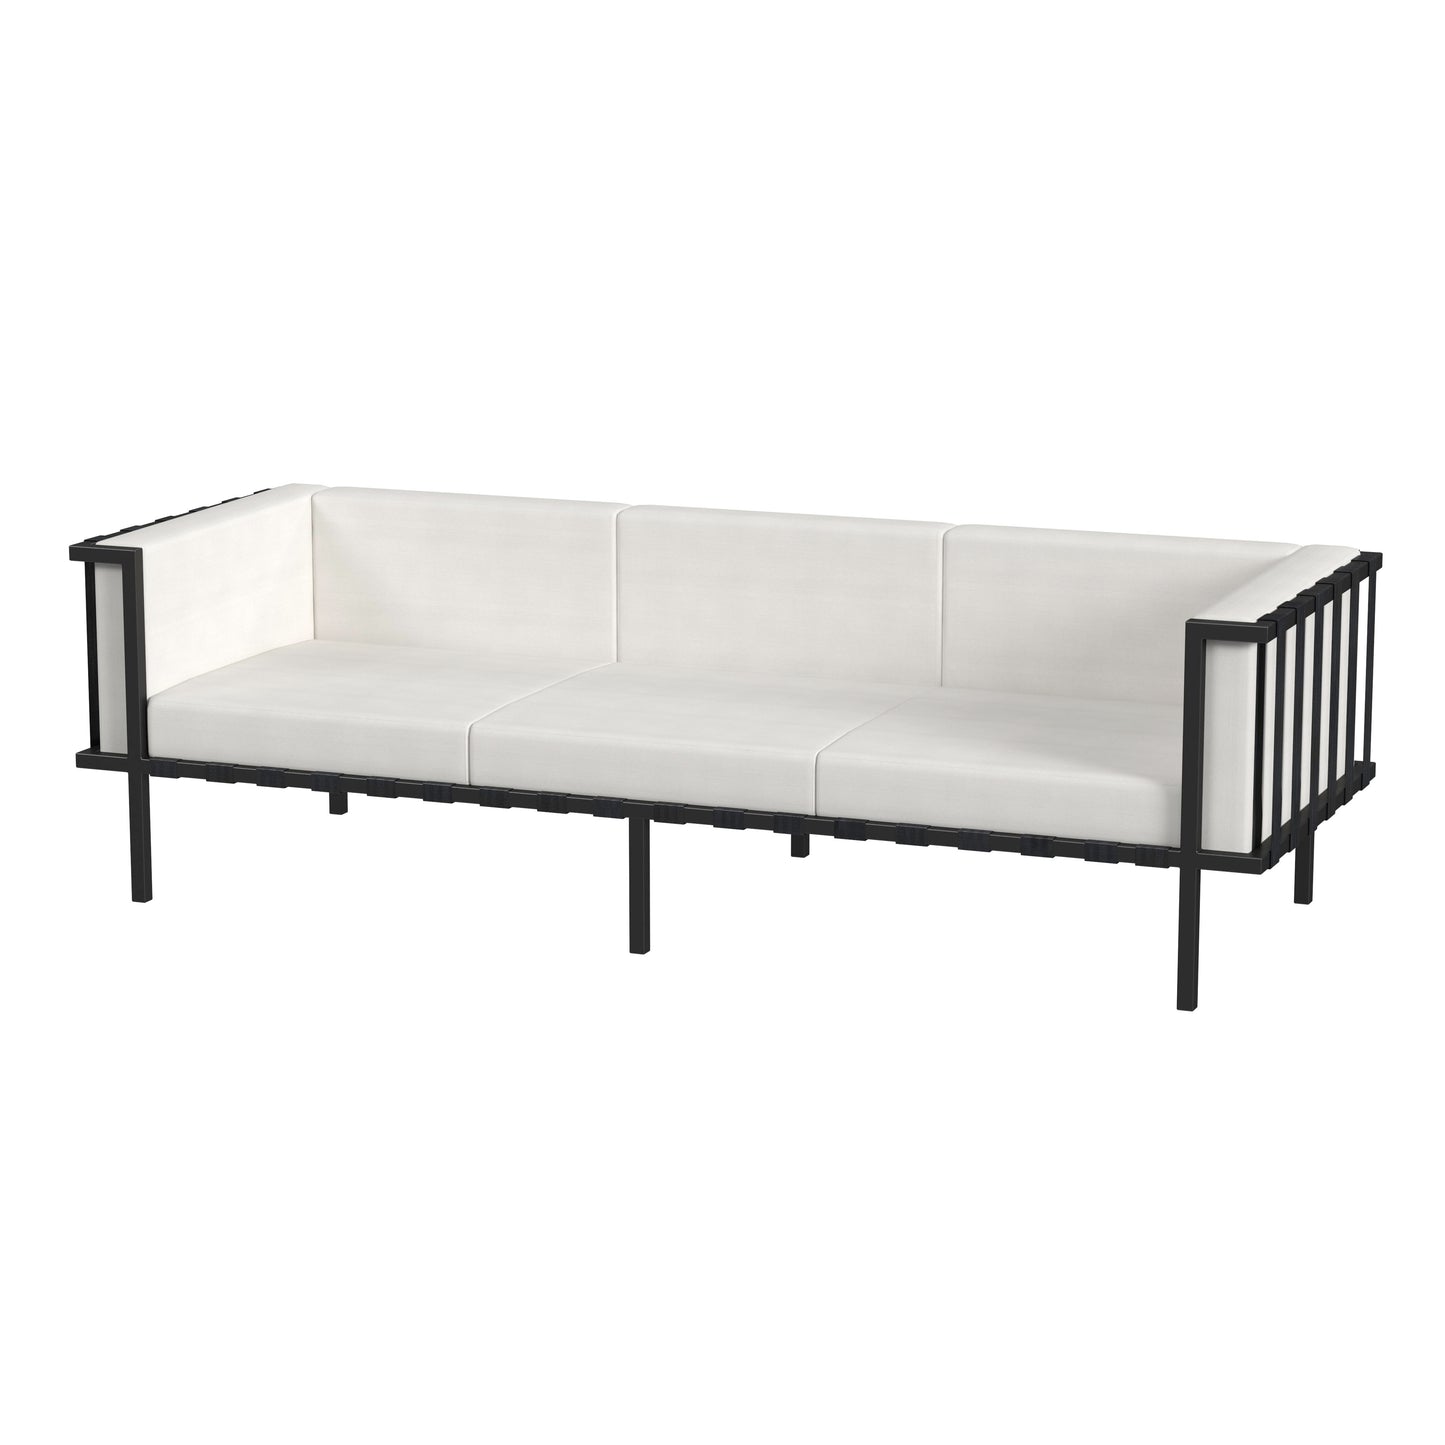 Norway Outdoor Patio Sofa with Cushions in Black and White  5722437